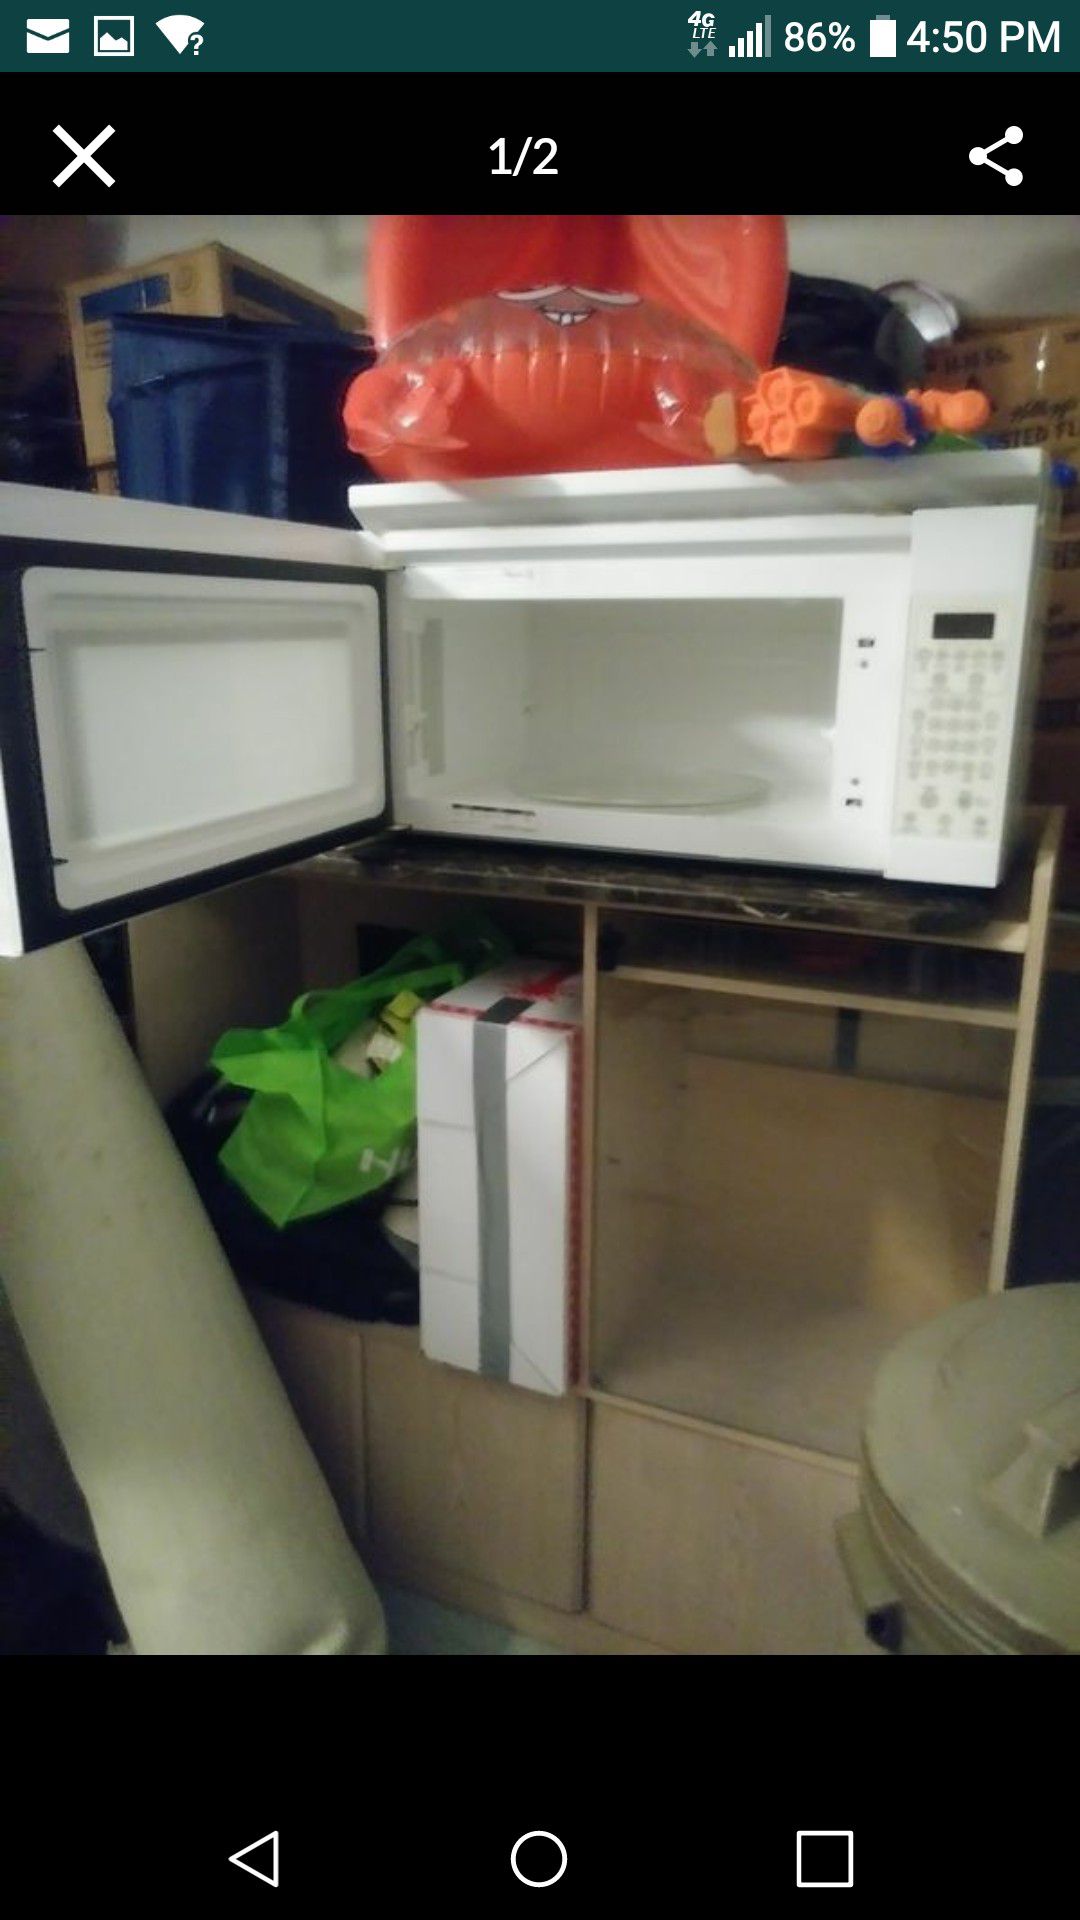 Large microwave clean, and works good. It has a small crack in the bottom left corner of the outside lining that decorates the microwave